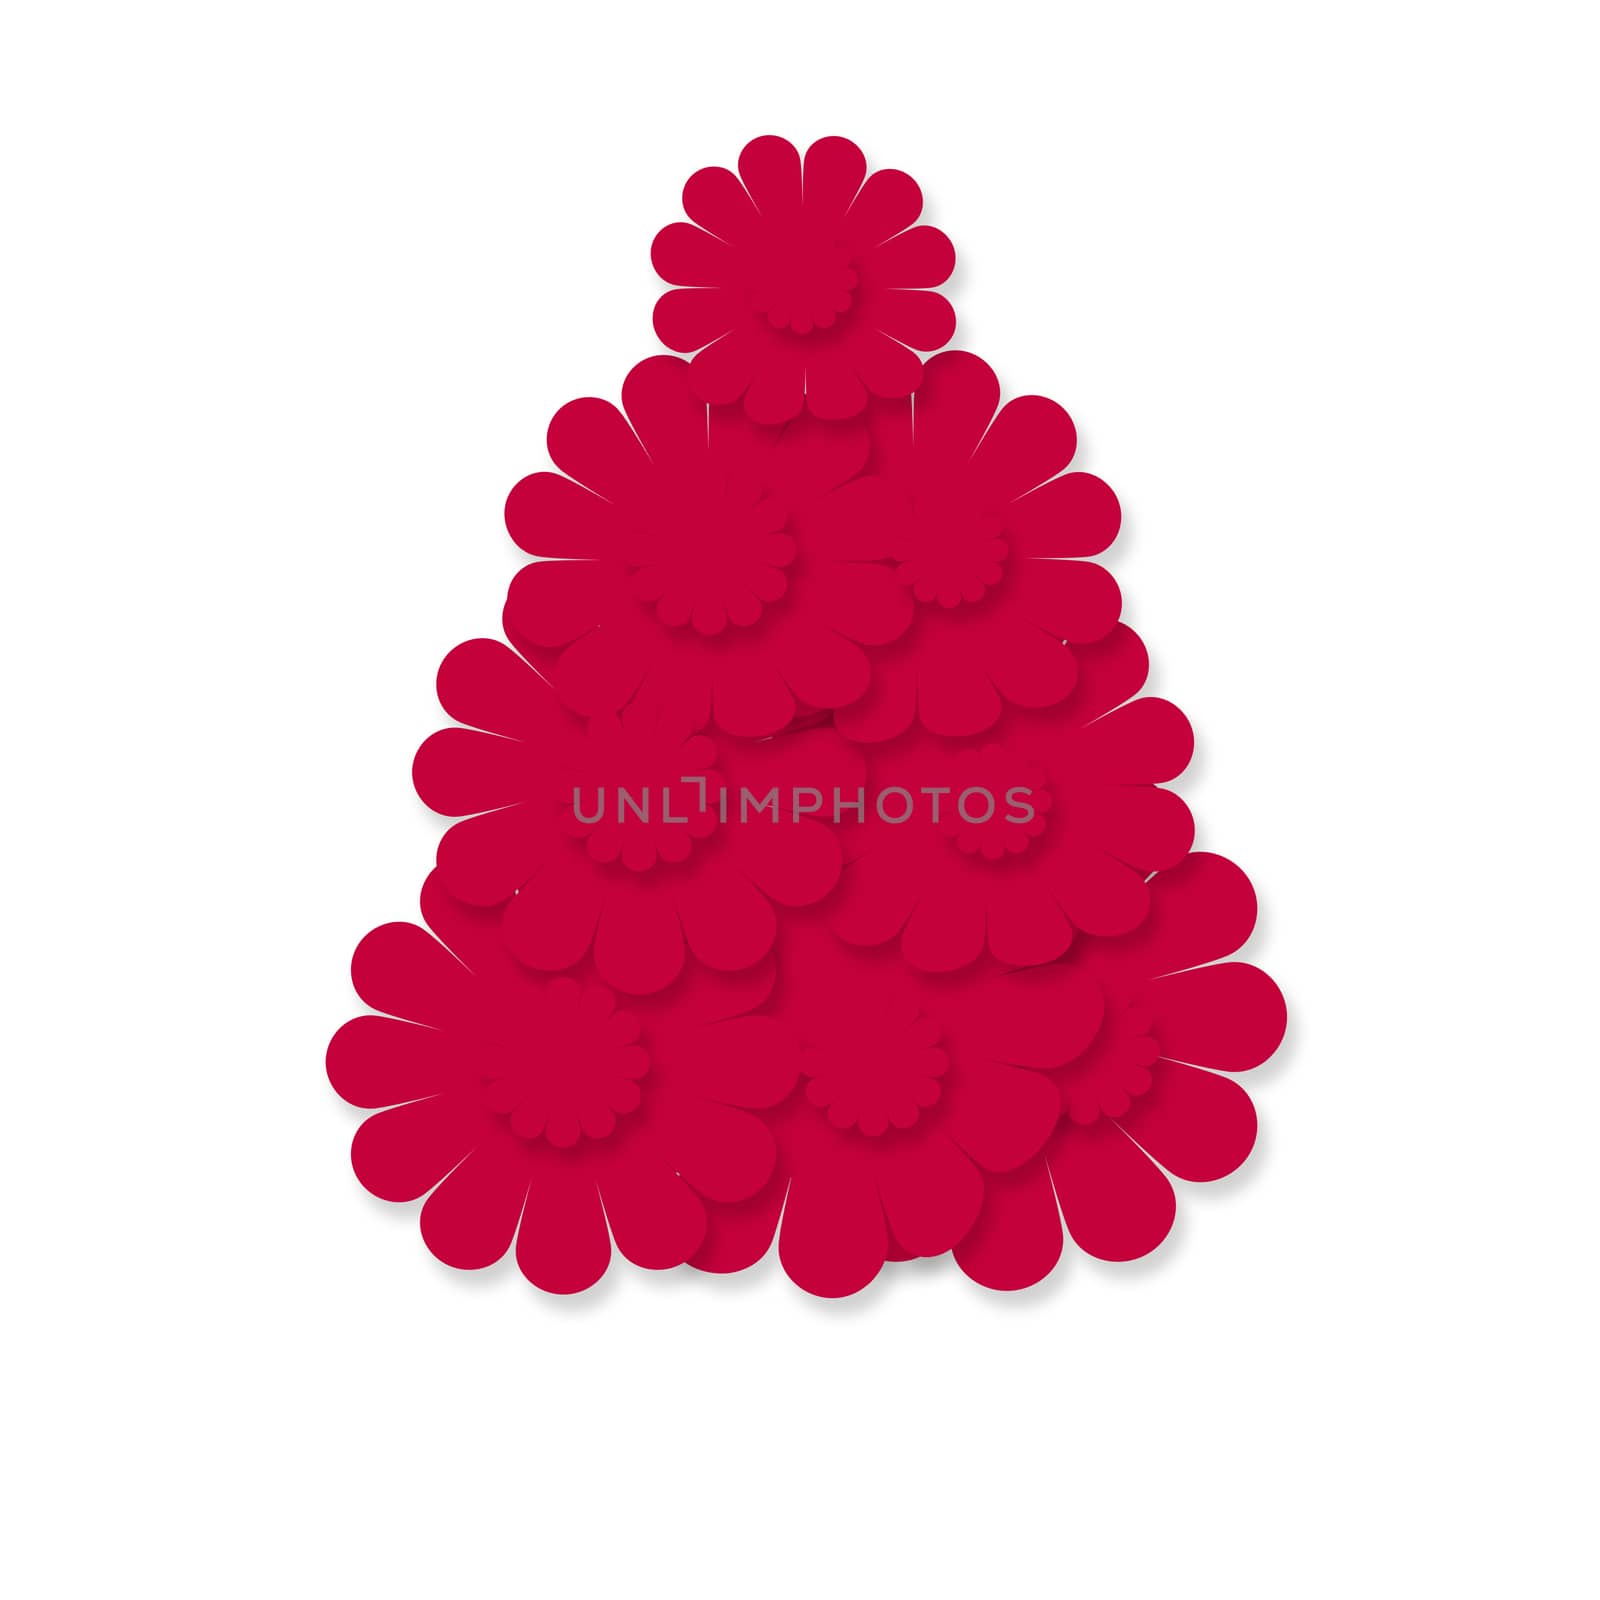 fir Christmas card, made with red flowers, isolated on white background